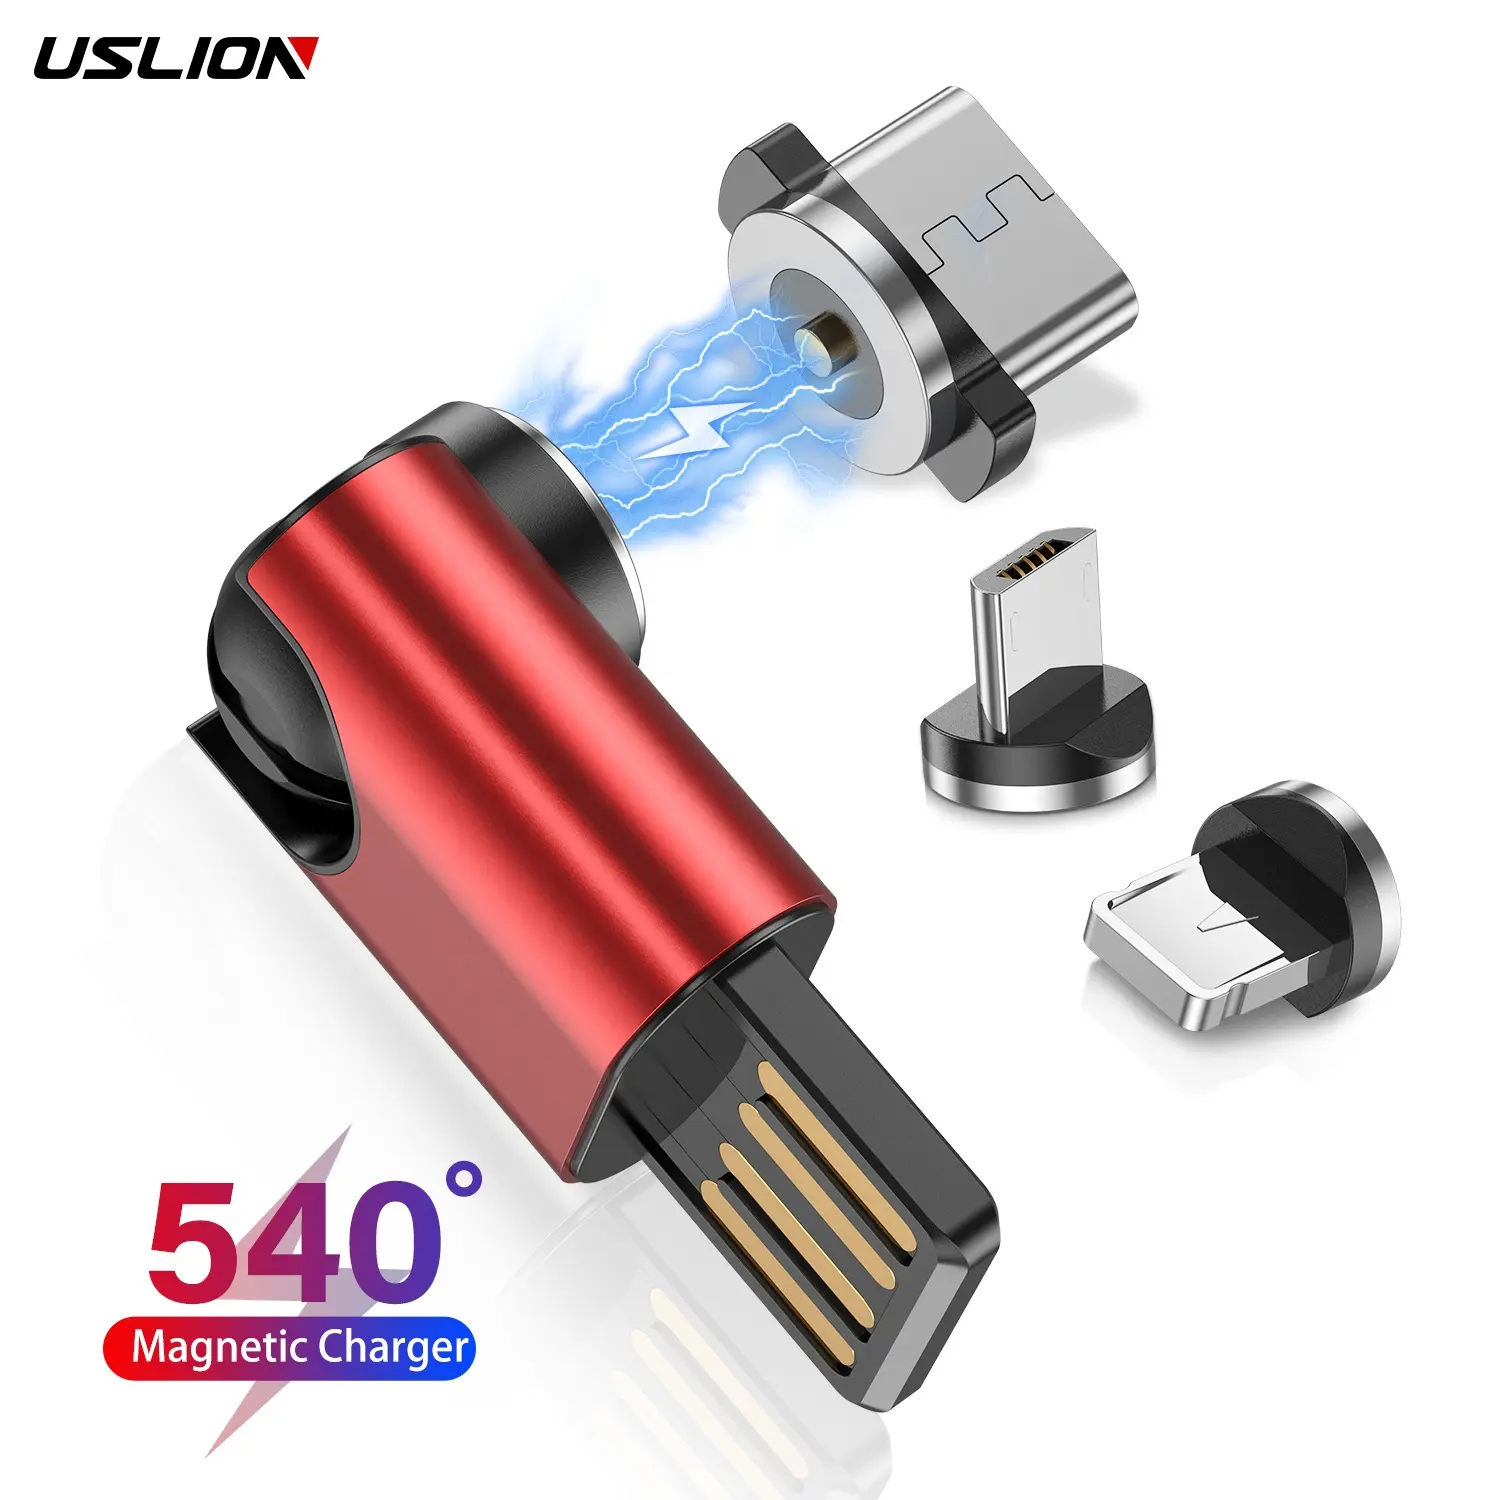 USLION Mini 540 Rotation Magnetic Charger Mobile Phone Adapter USB Type C Converter Cable for iphone Huawei Samsung